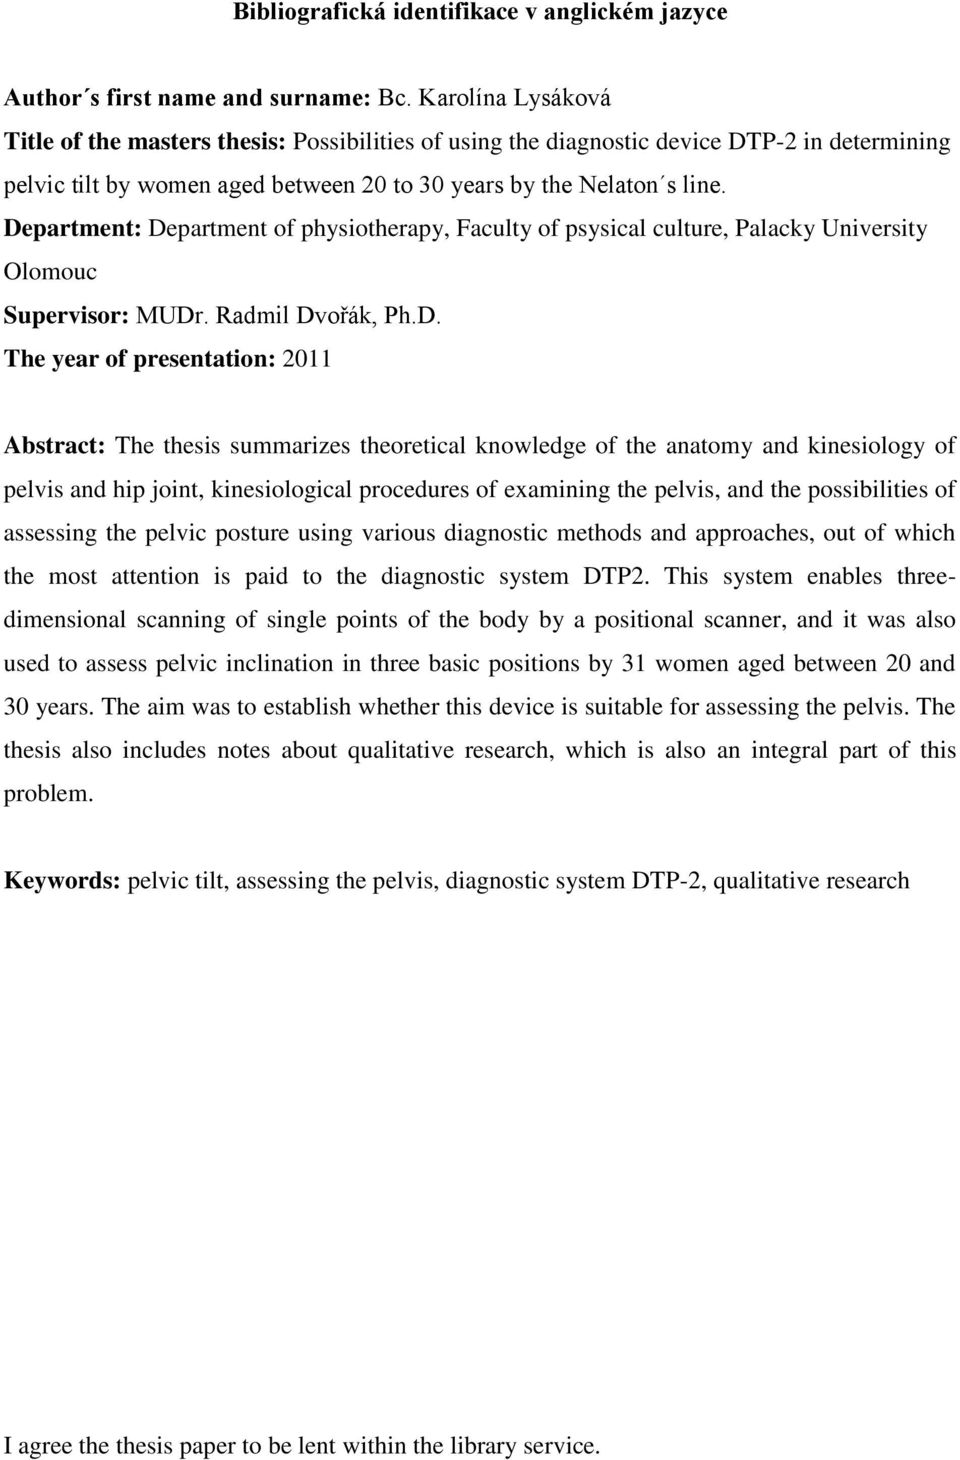 Department: Department of physiotherapy, Faculty of psysical culture, Palacky University Olomouc Supervisor: MUDr. Radmil Dvořák, Ph.D. The year of presentation: 2011 Abstract: The thesis summarizes